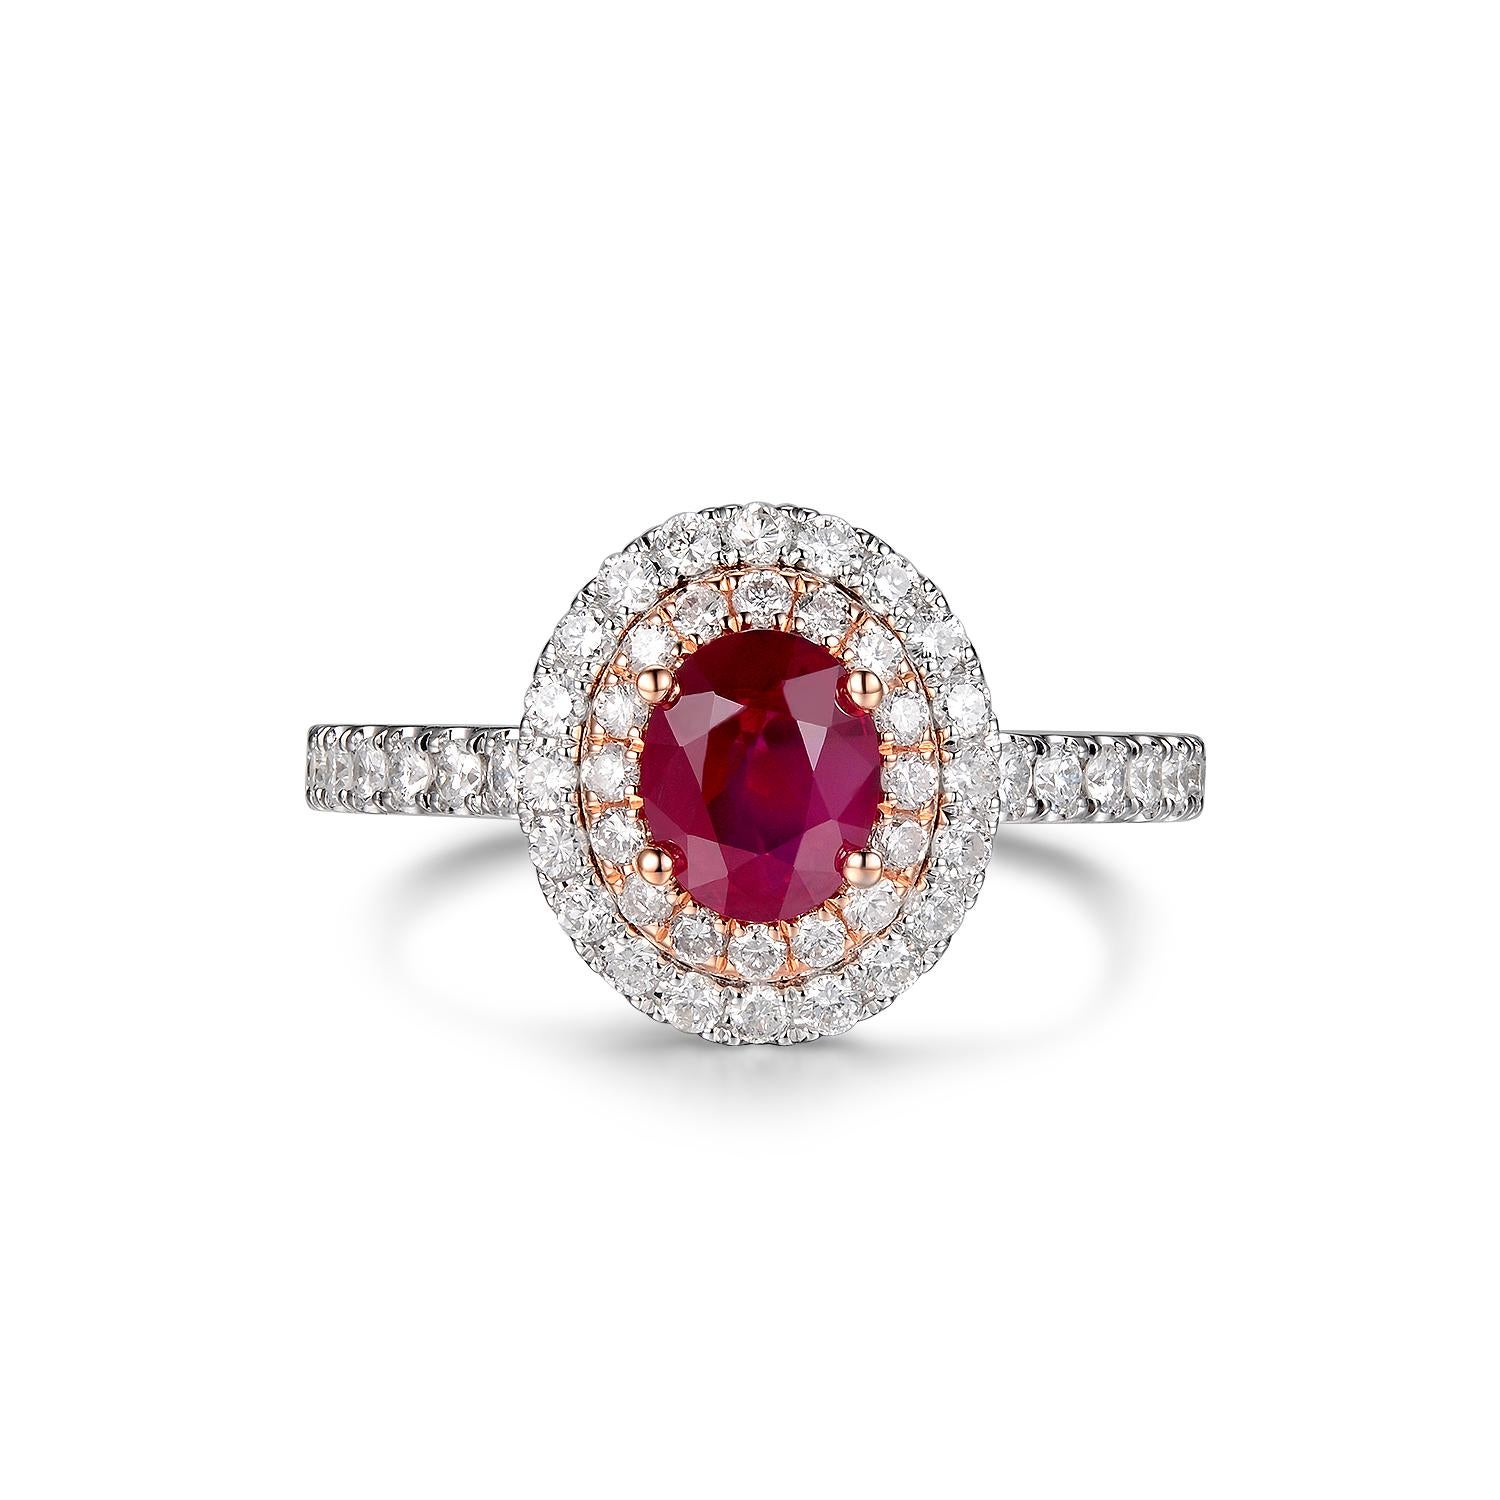 This ring features 0.80 carat of ruby in the center. A contemporary yet modern design. Assented with 0.52 carat of diamonds. There are 2 diamonds halo surrounded the center ruby. One halo is set in 18 karat rose gold and the outer diamond halo is